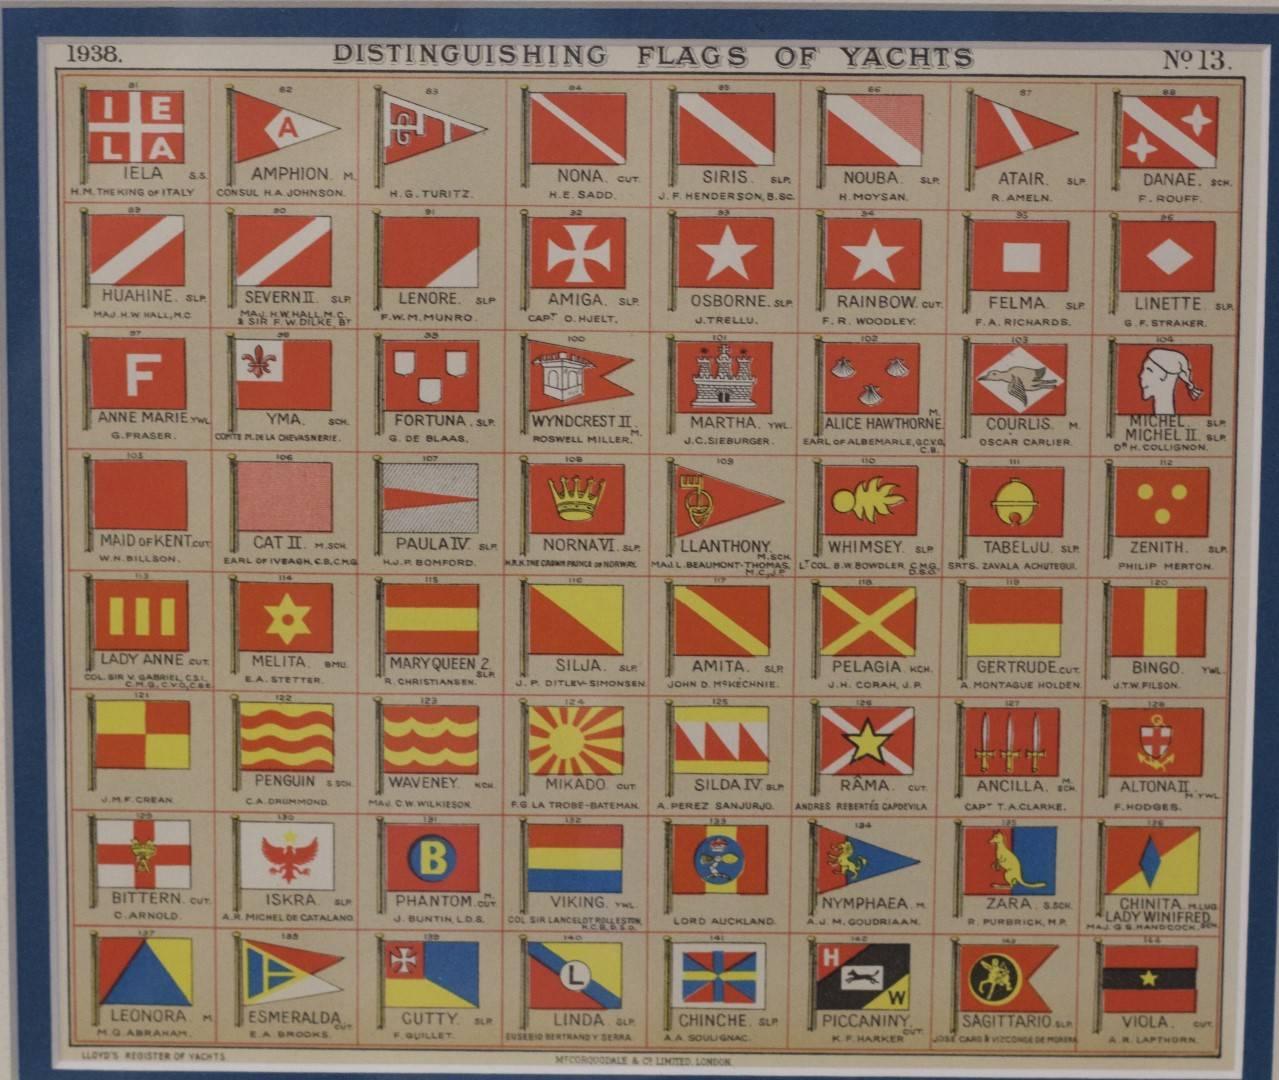 A framed page from Lloyd's register, circa 1938. Showing distinguishing flags of yachts. Yacht owners include King of Italy, numbers 81 to 144. Matted and framed. Dimensions: 12" H x 14" L.